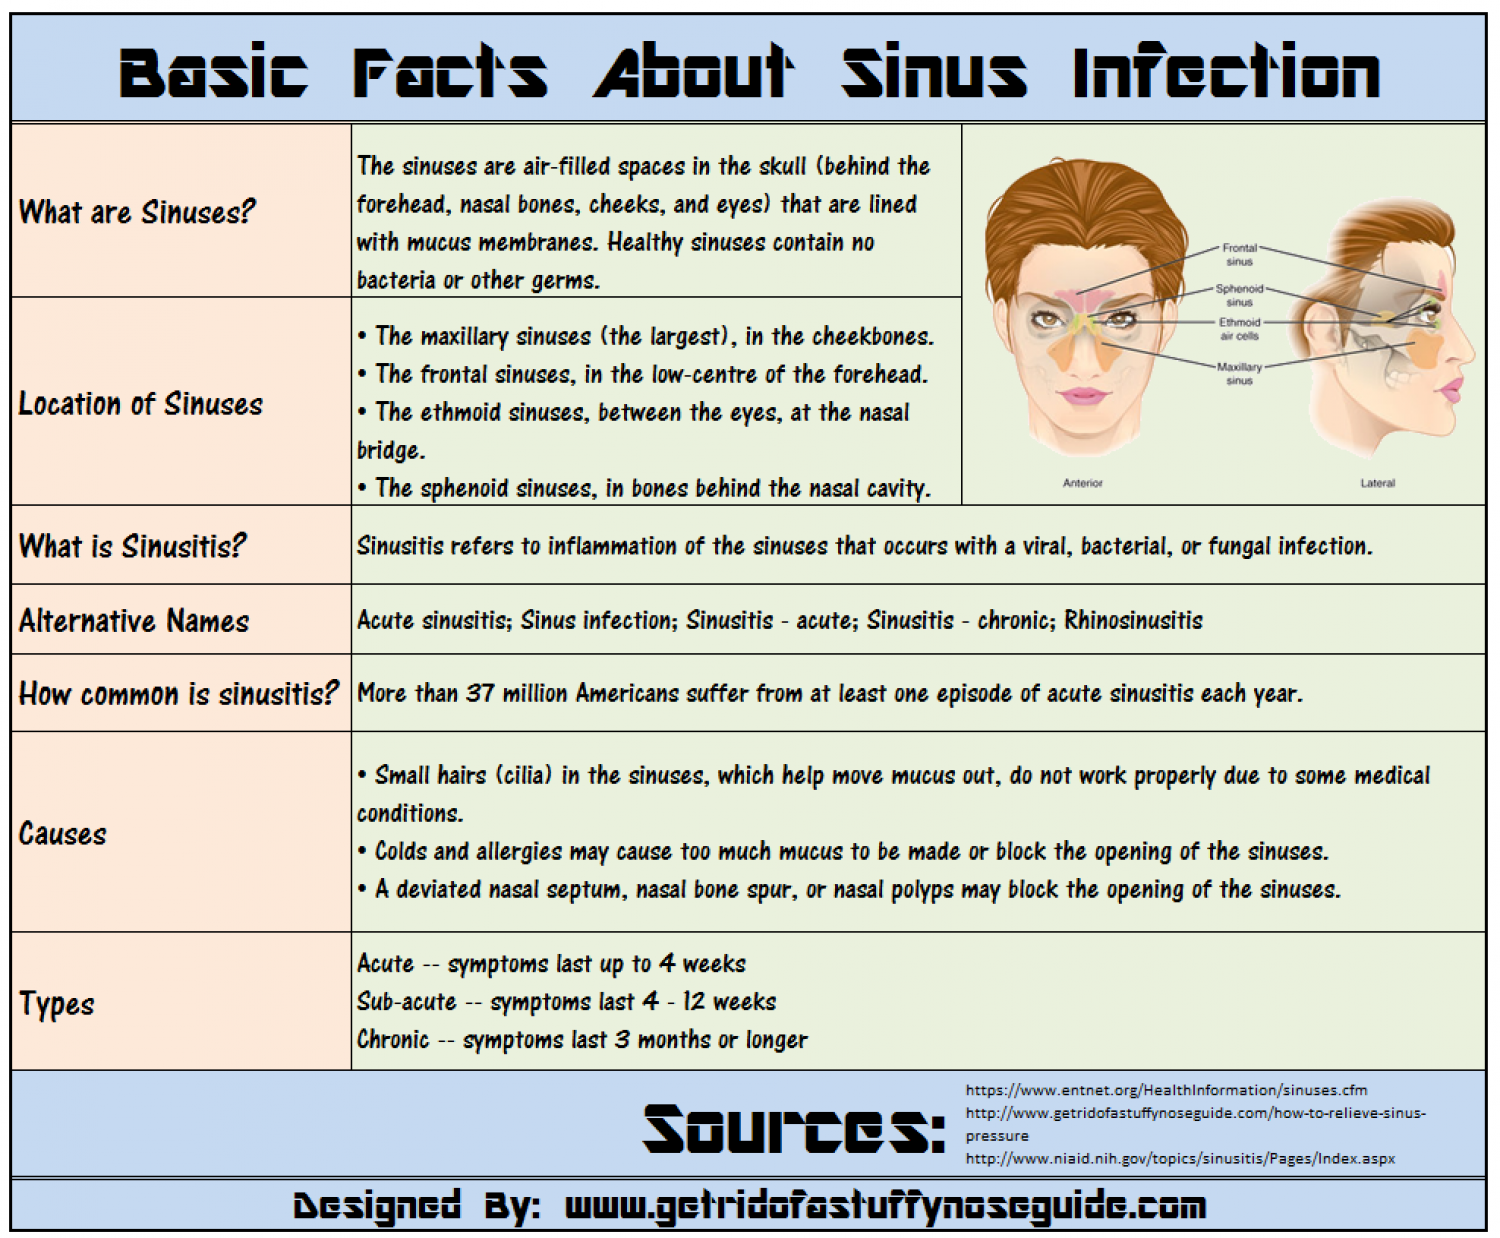 Basic Facts About Sinus Infection